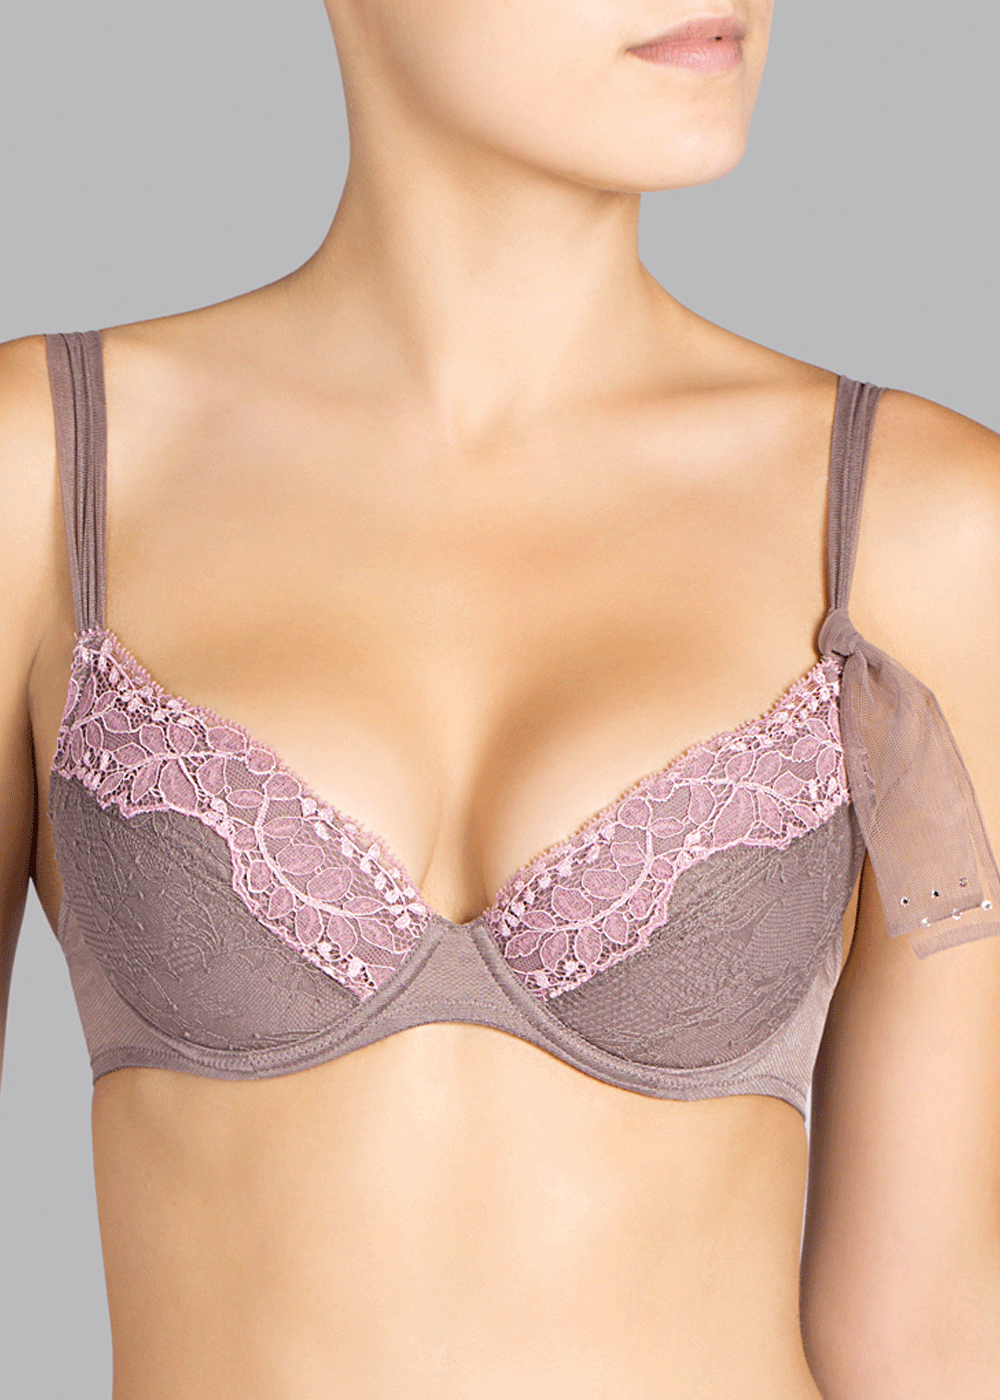 Soutien-gorge Push-up Andres Sarda Taupe